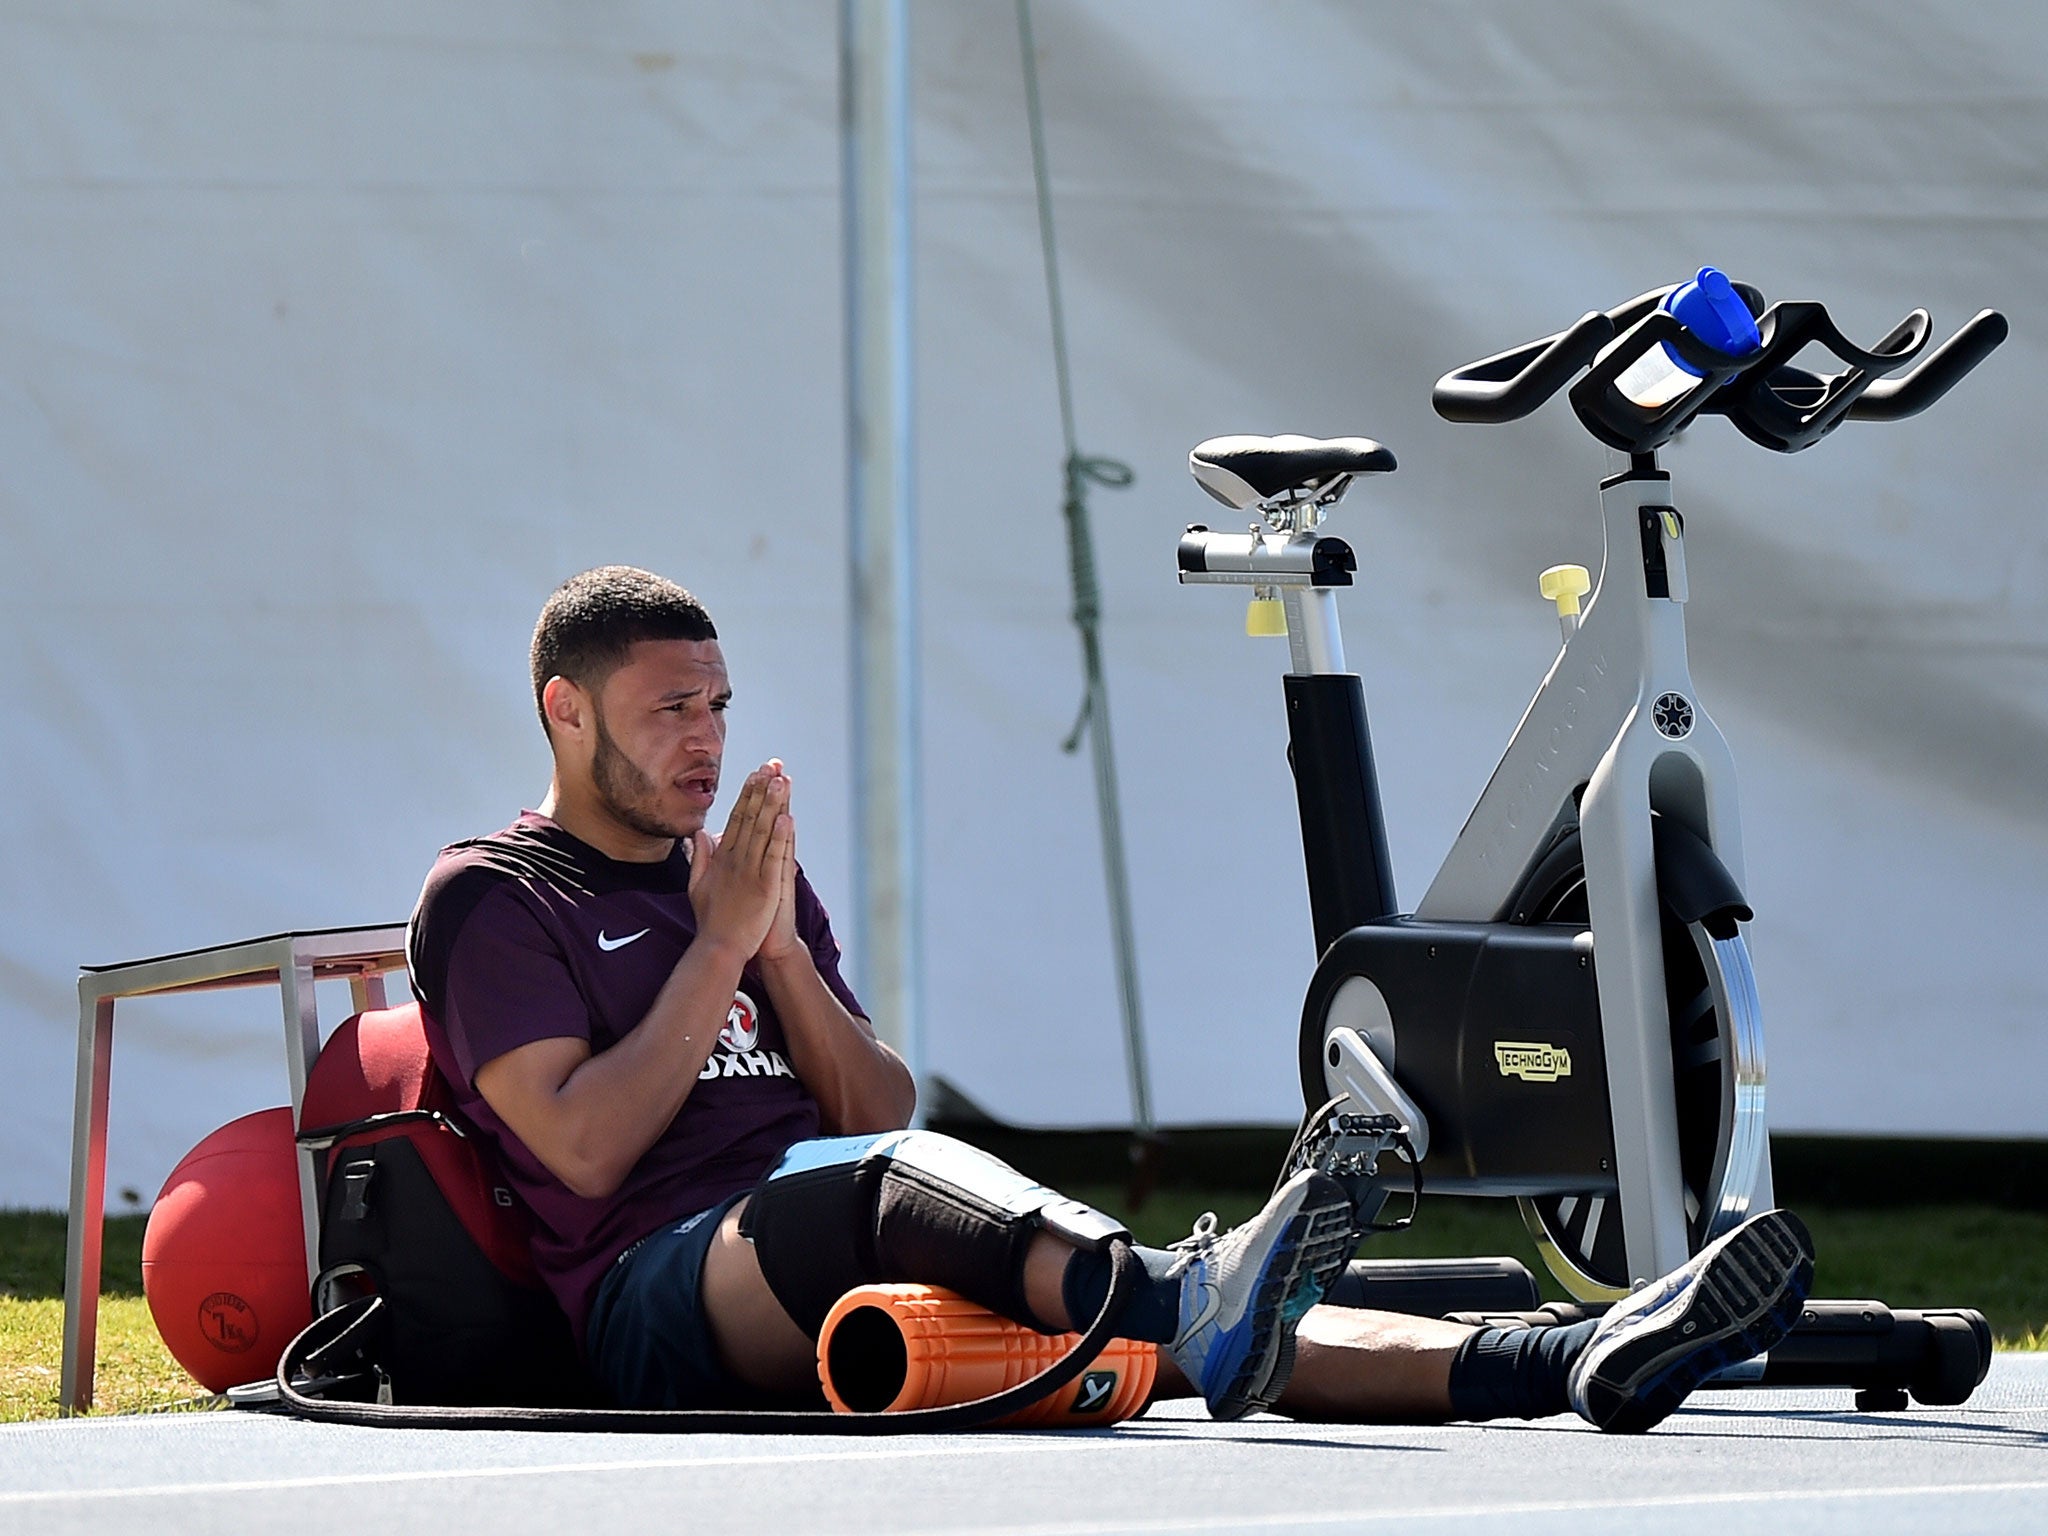 Alex Oxlade-Chamberlain has been playing through the pain barrier for the past two years